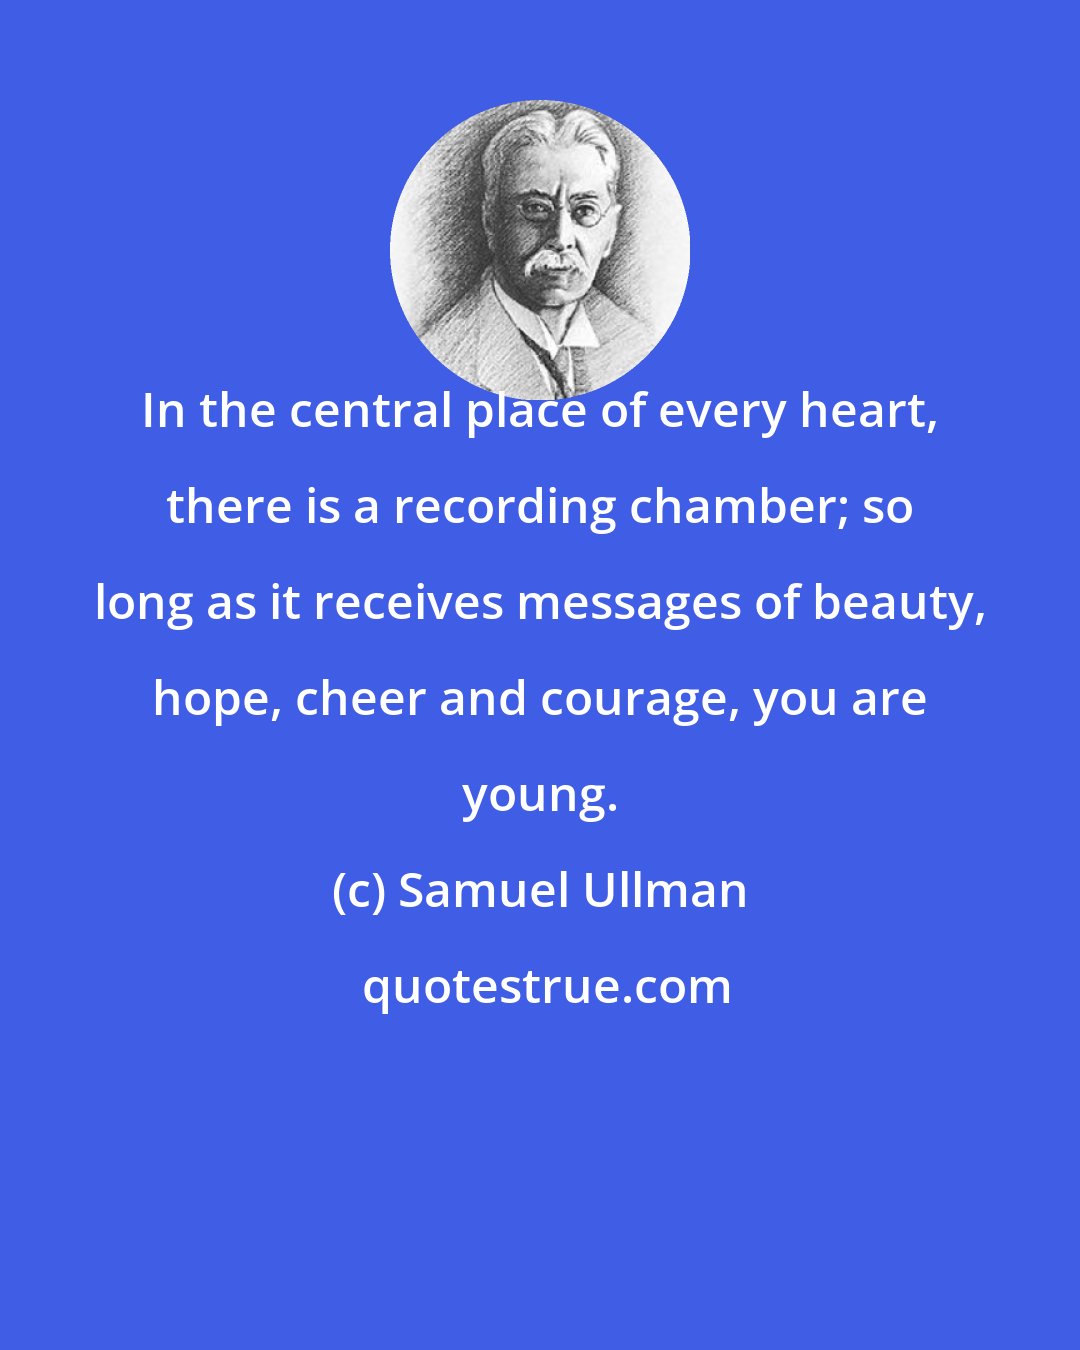 Samuel Ullman: In the central place of every heart, there is a recording chamber; so long as it receives messages of beauty, hope, cheer and courage, you are young.